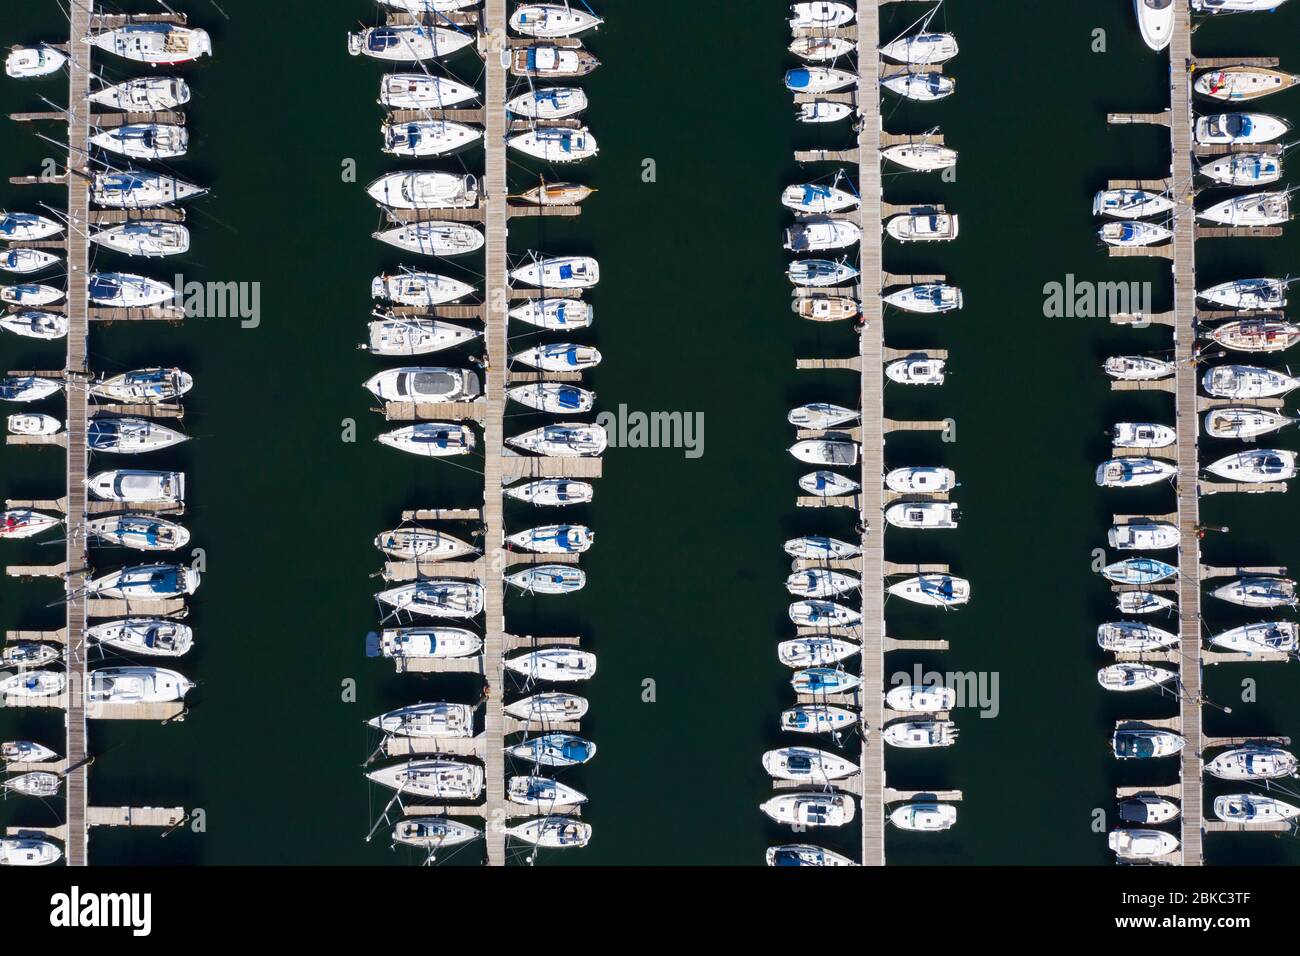 Largs, Scotland, UK. 4 May 2020. Aerial view of Largs Yacht Haven which is very busy with almost all berths being filled with yachts. Normally many yachts would be out sailing at this time of year but are now forced to remain at the harbour during the coronavirus lockdown. Iain Masterton/Alamy Live News Stock Photo